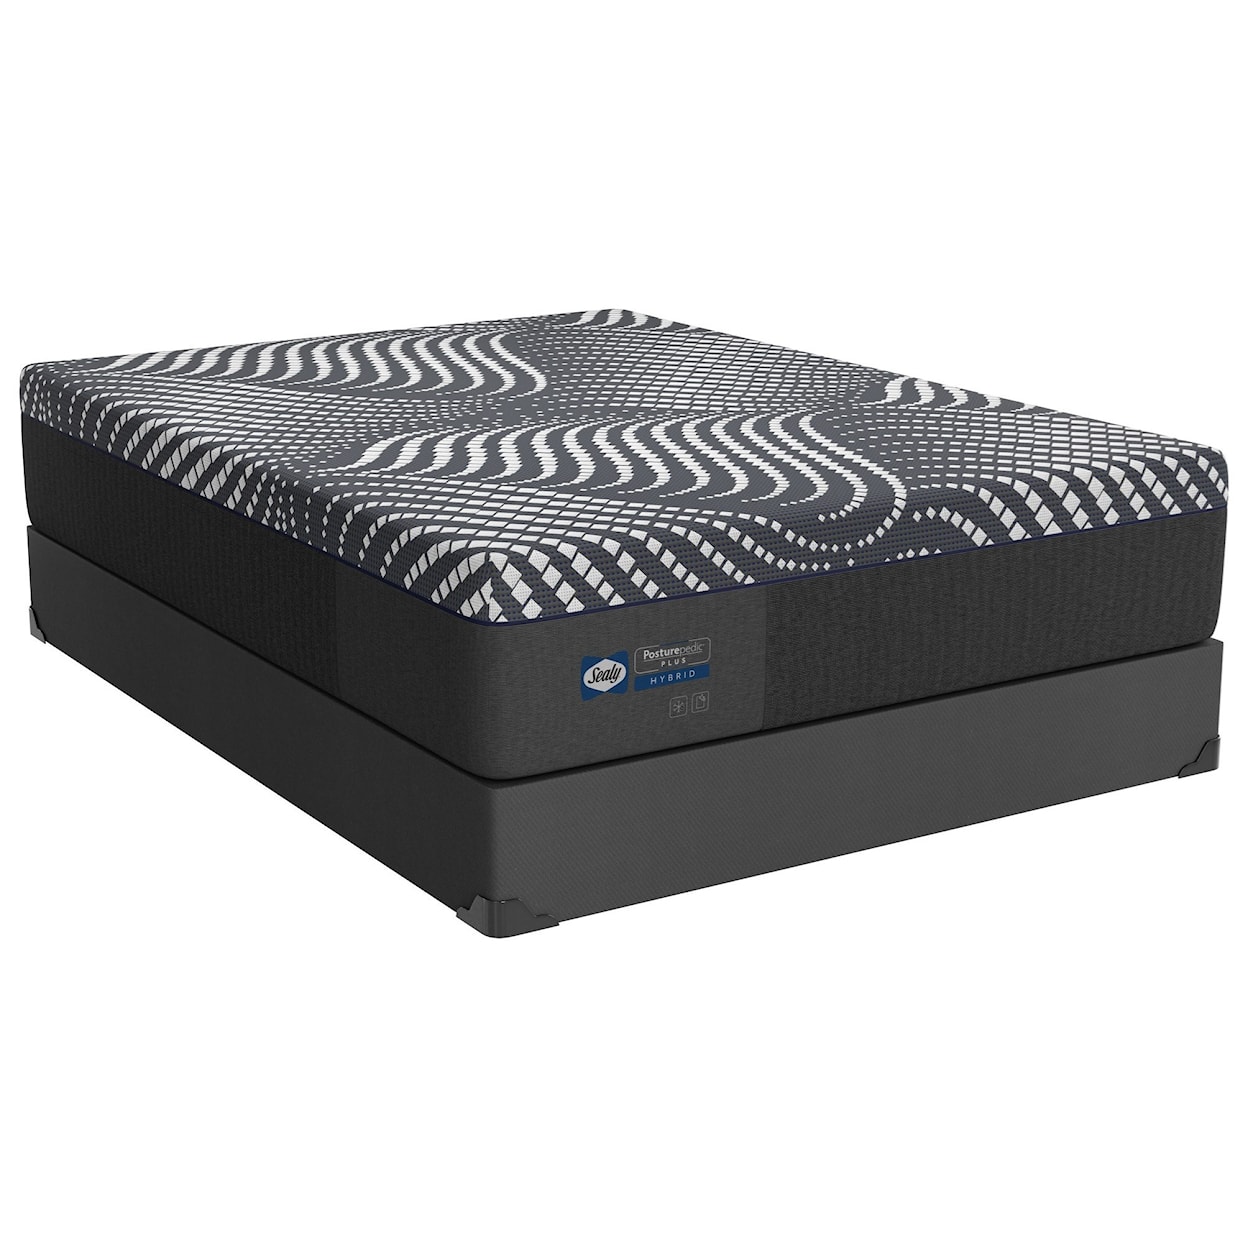 Sealy PLH5 Posturepedic Plus Hybrid Soft Queen Soft Mattress and 9" Foundation